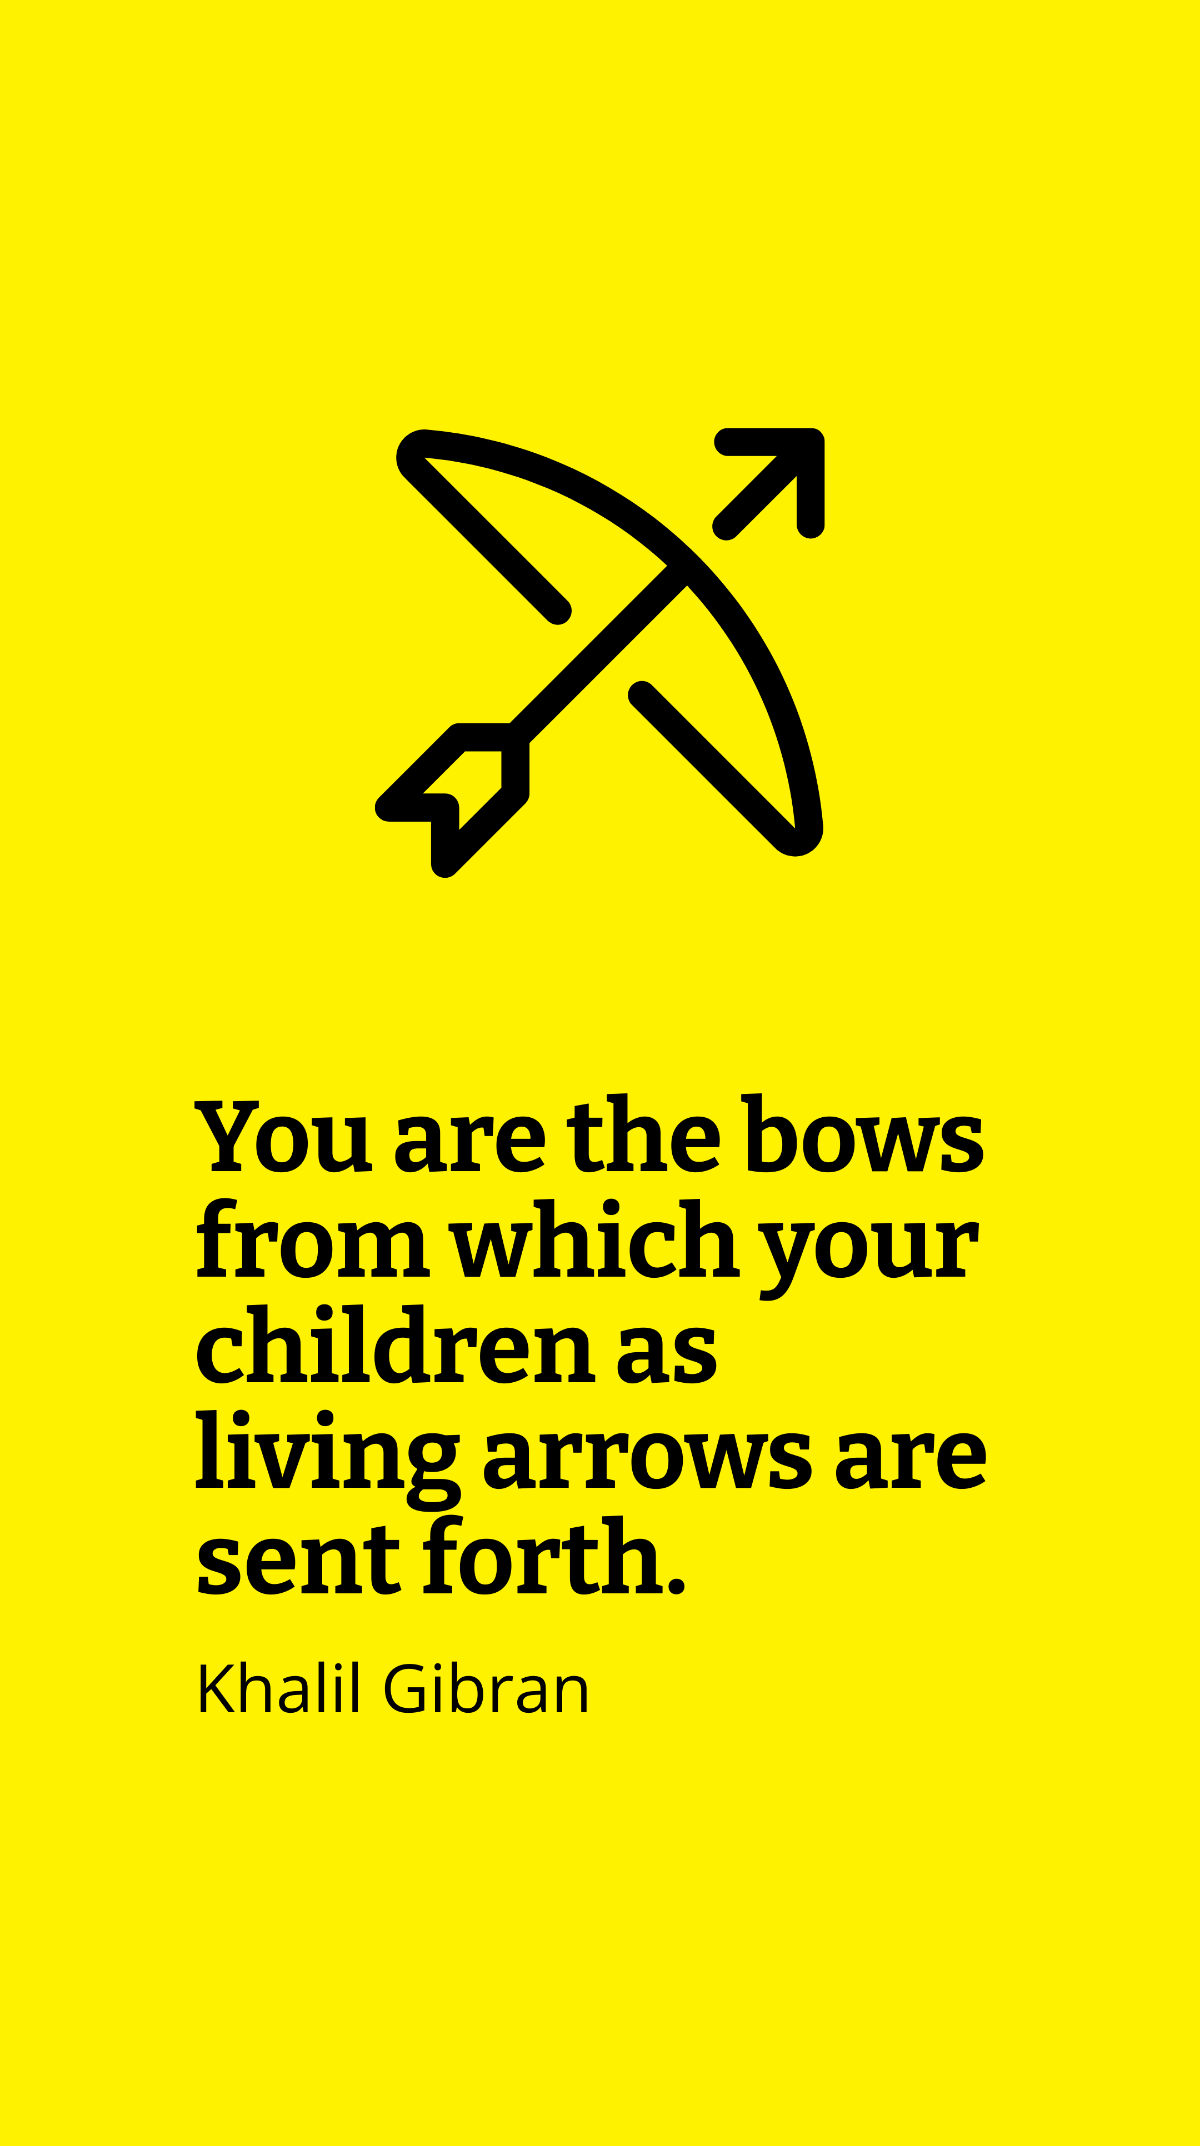 Khalil Gibran - You are the bows from which your children as living arrows are sent forth. Template